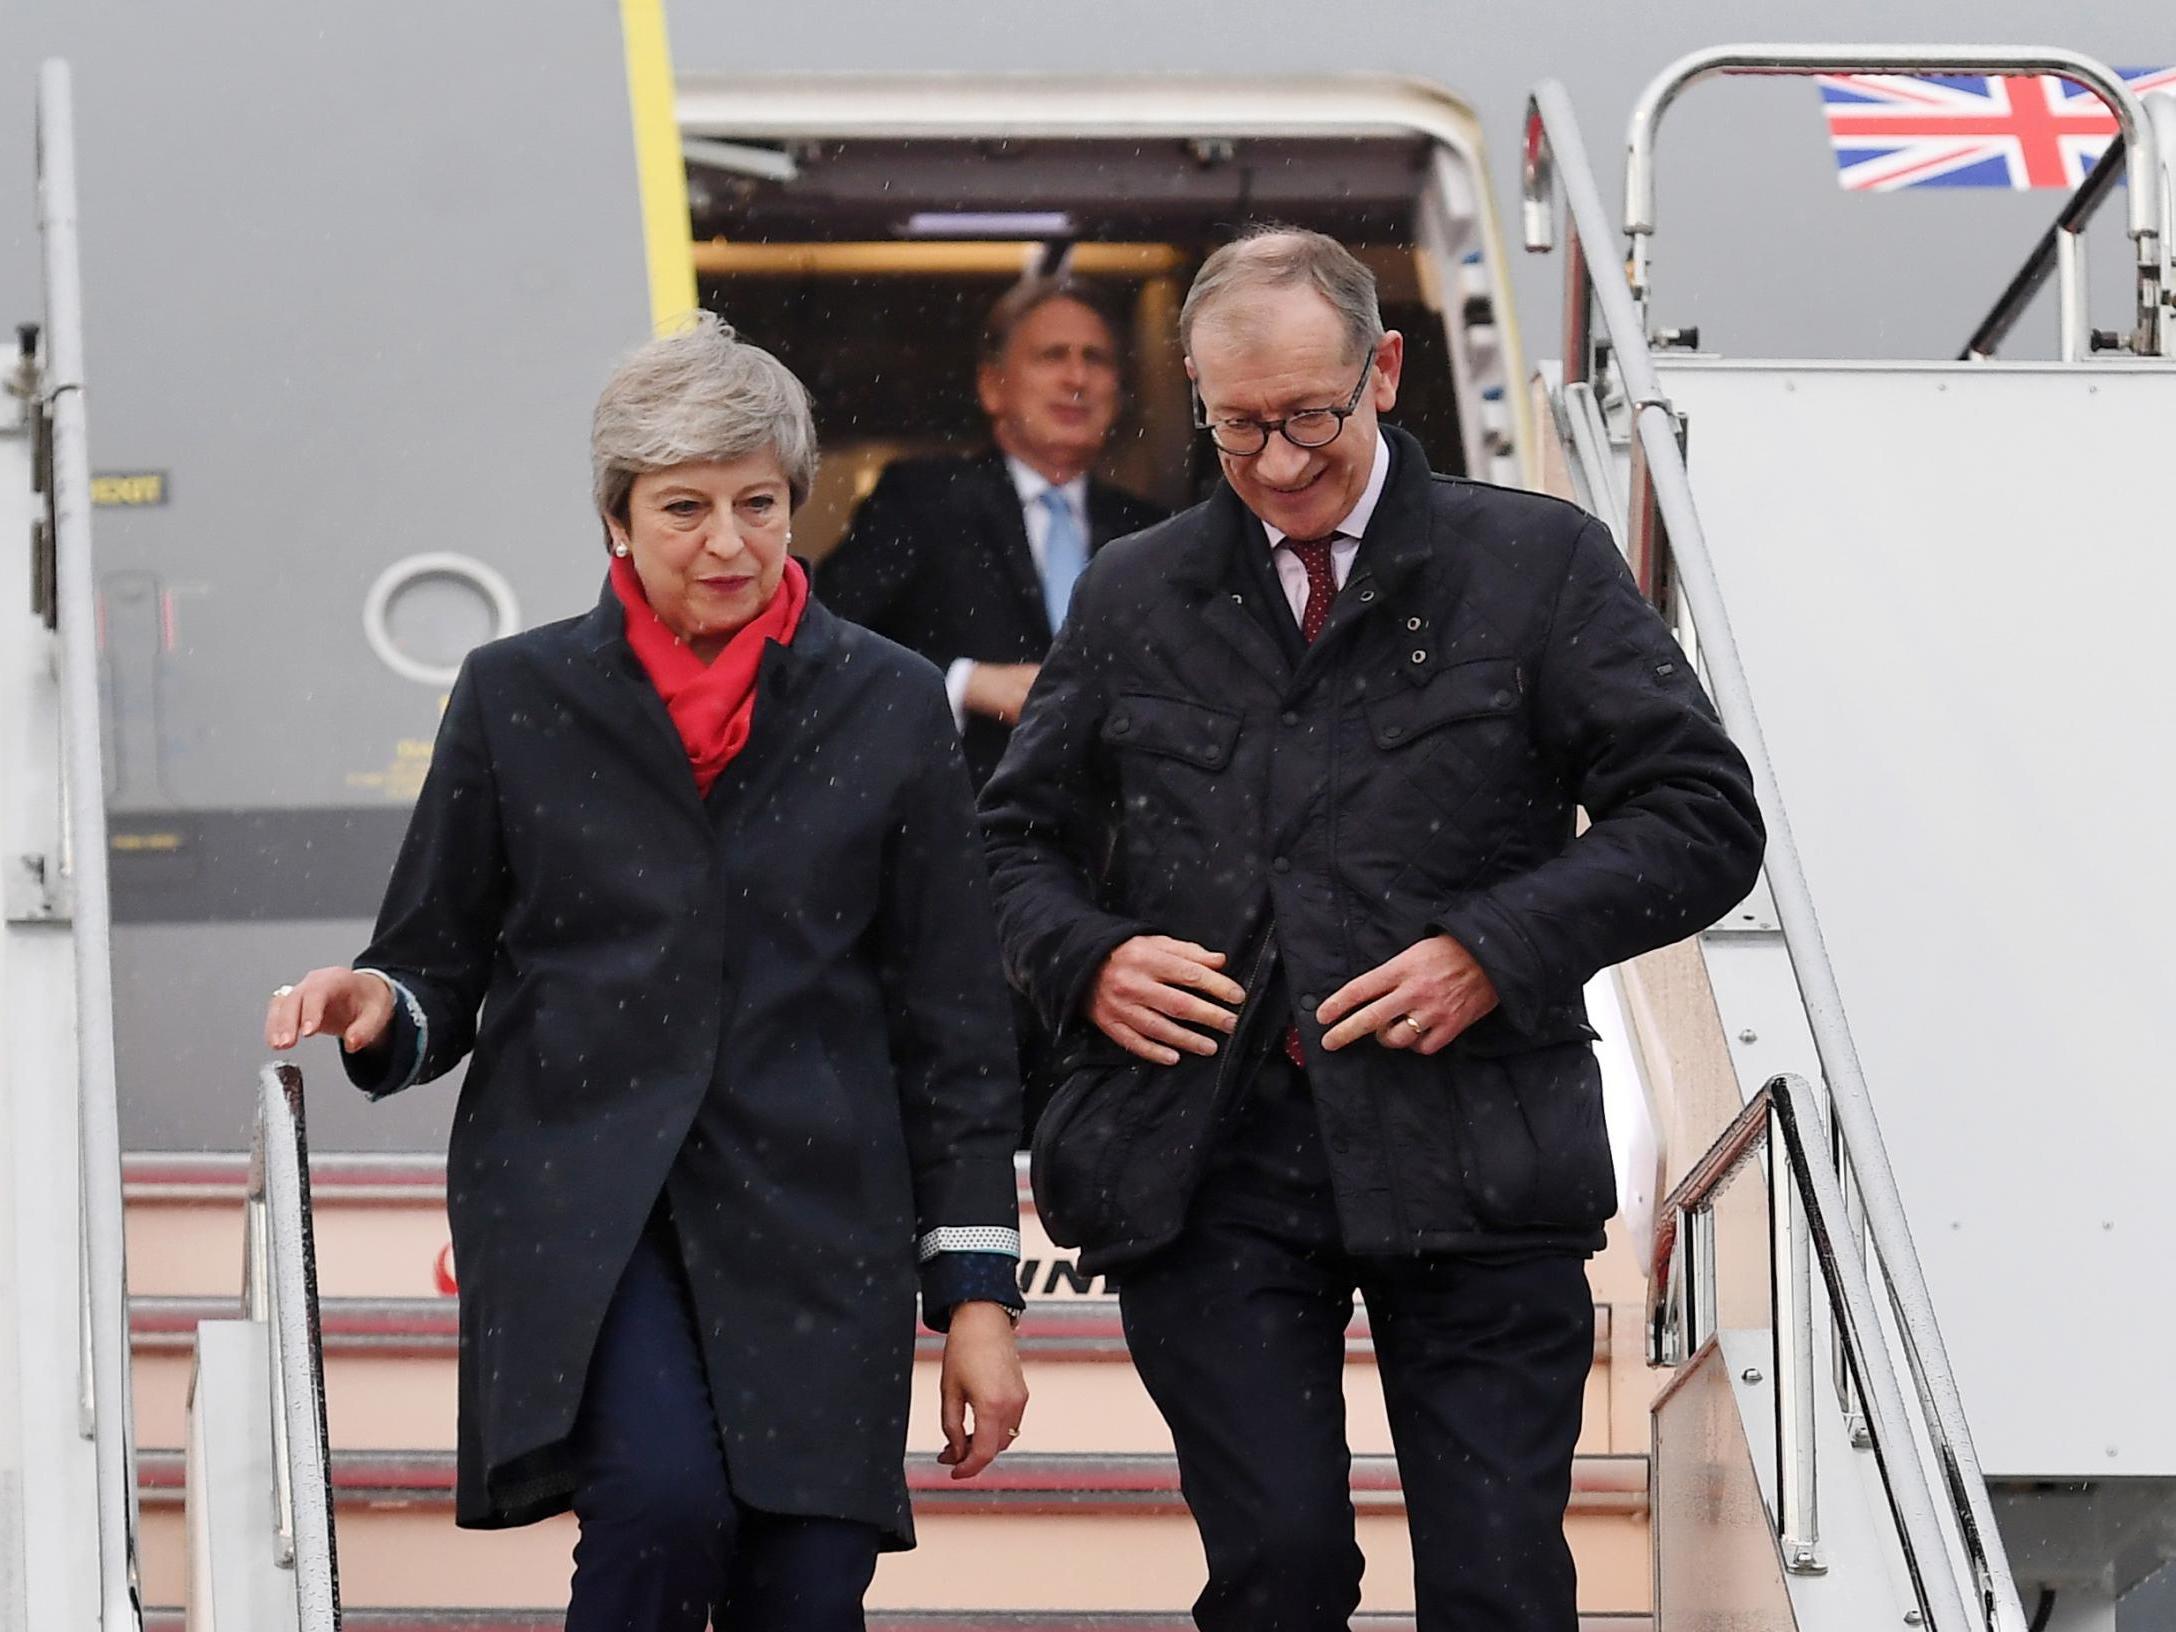 Theresa May arrives with her husband Philip May in Osaka, where she is expected to hold bilateral talks with Vladimir Putin